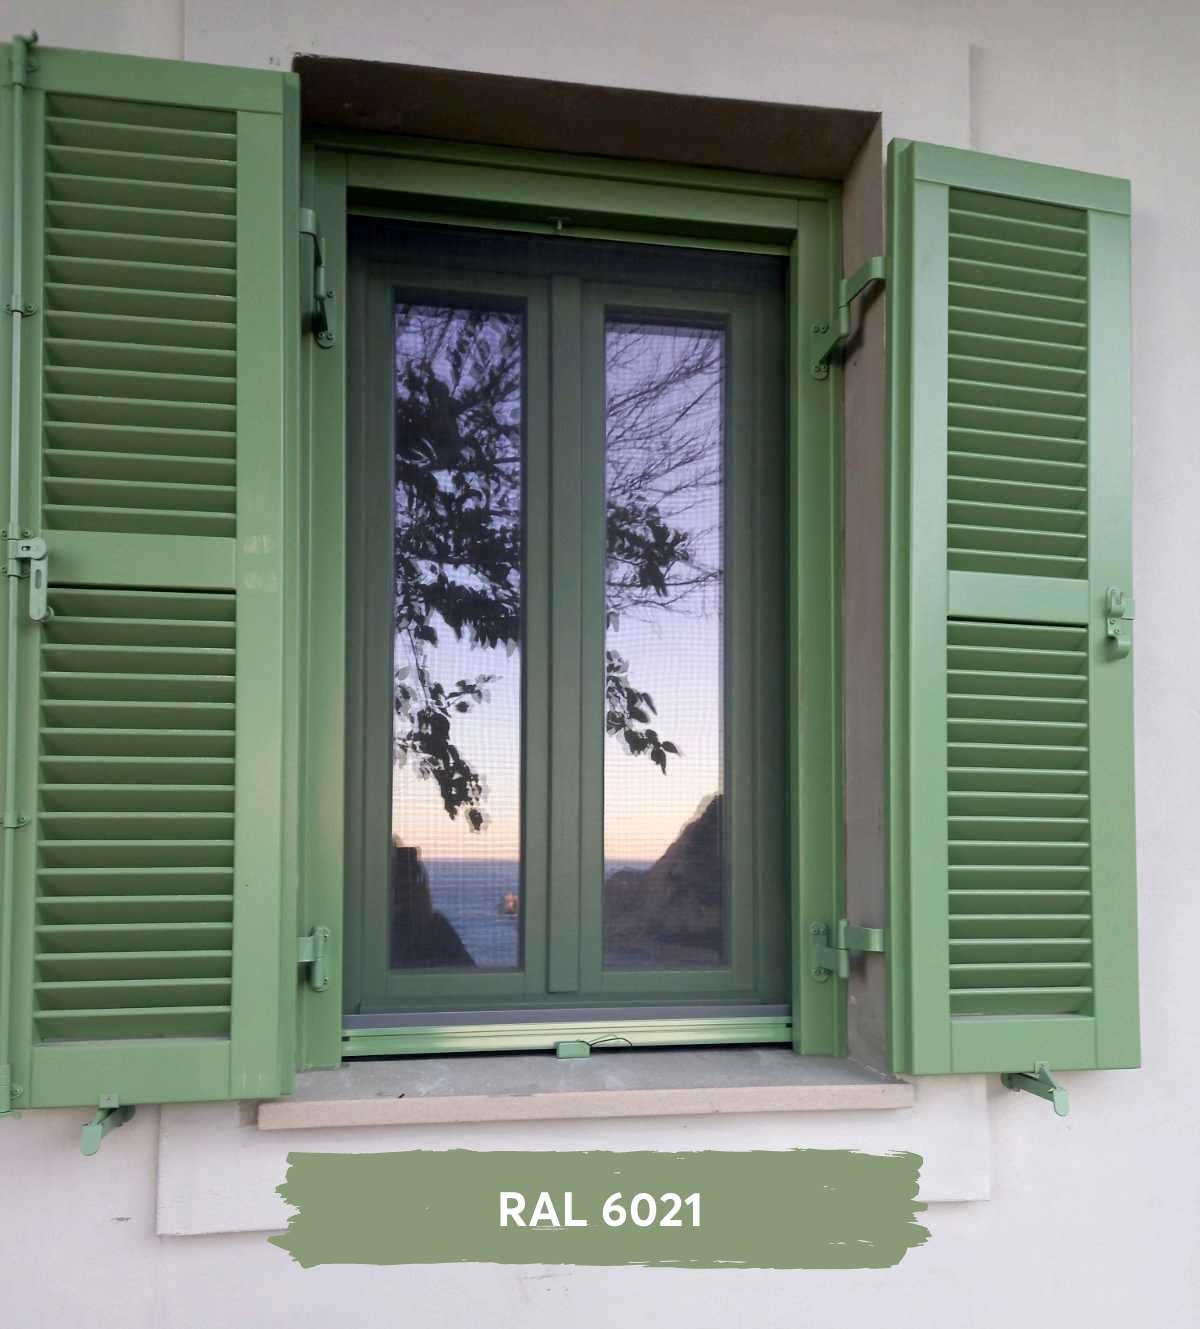 ral 6021